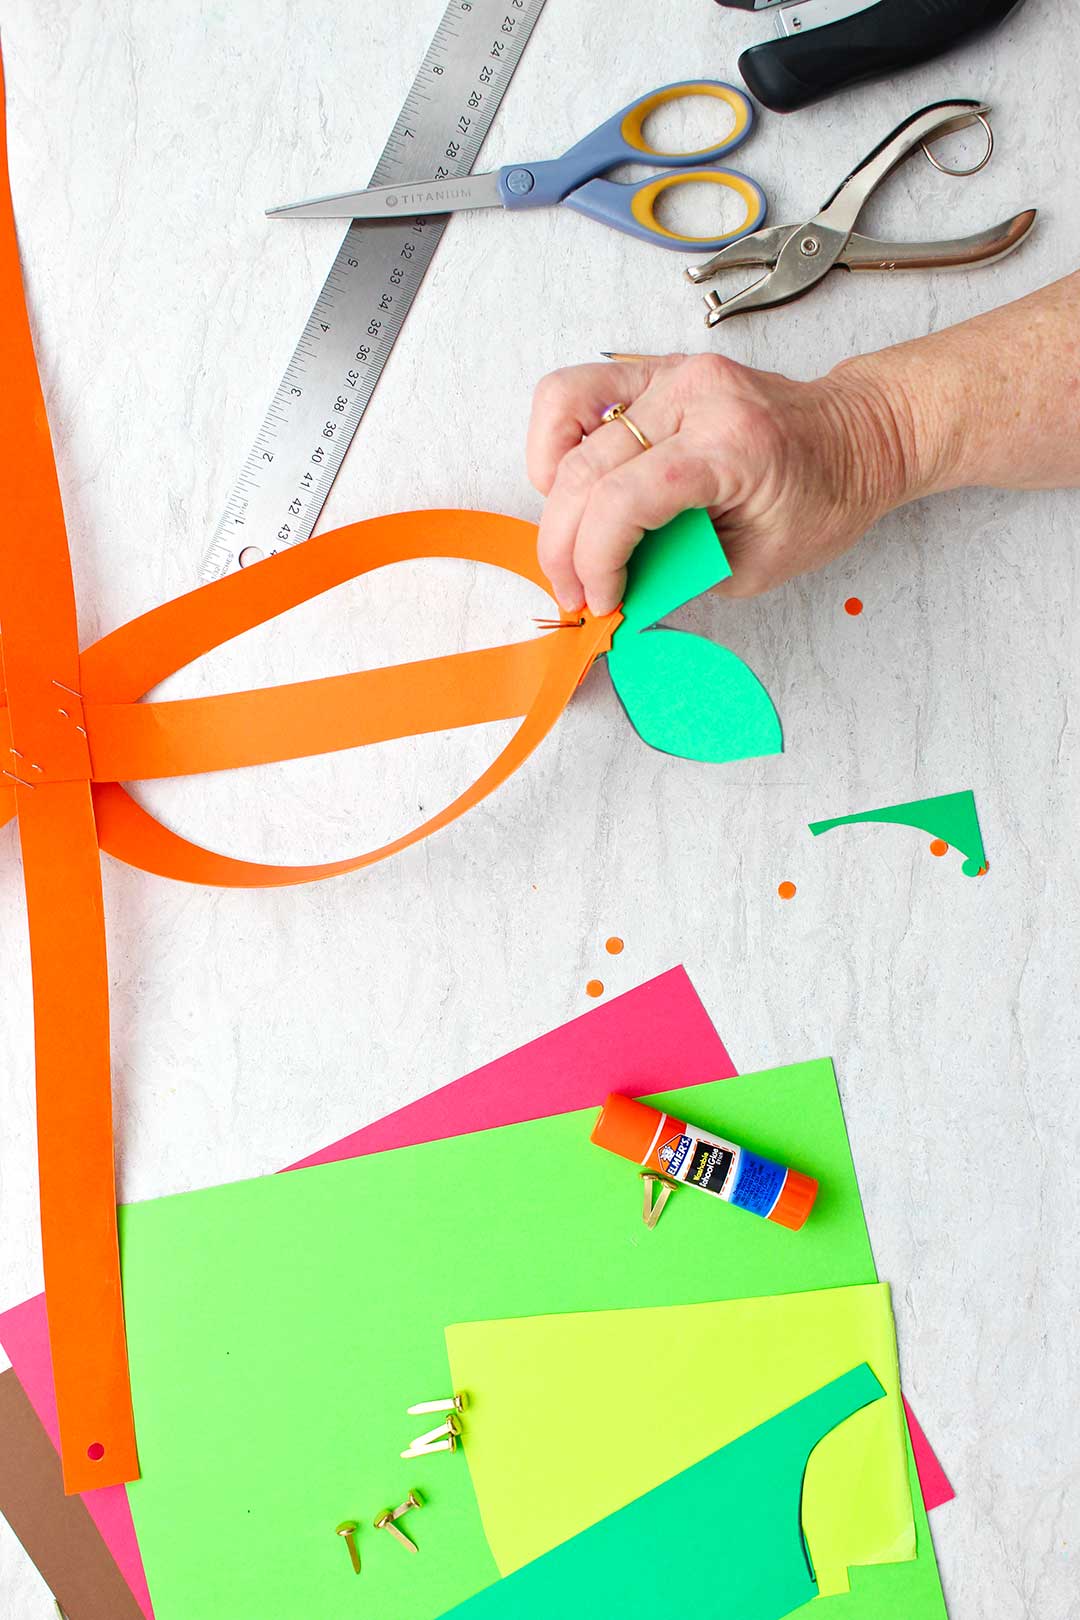 Hand securing green paper stem with metal brad on partially made orange paper pumpkin.